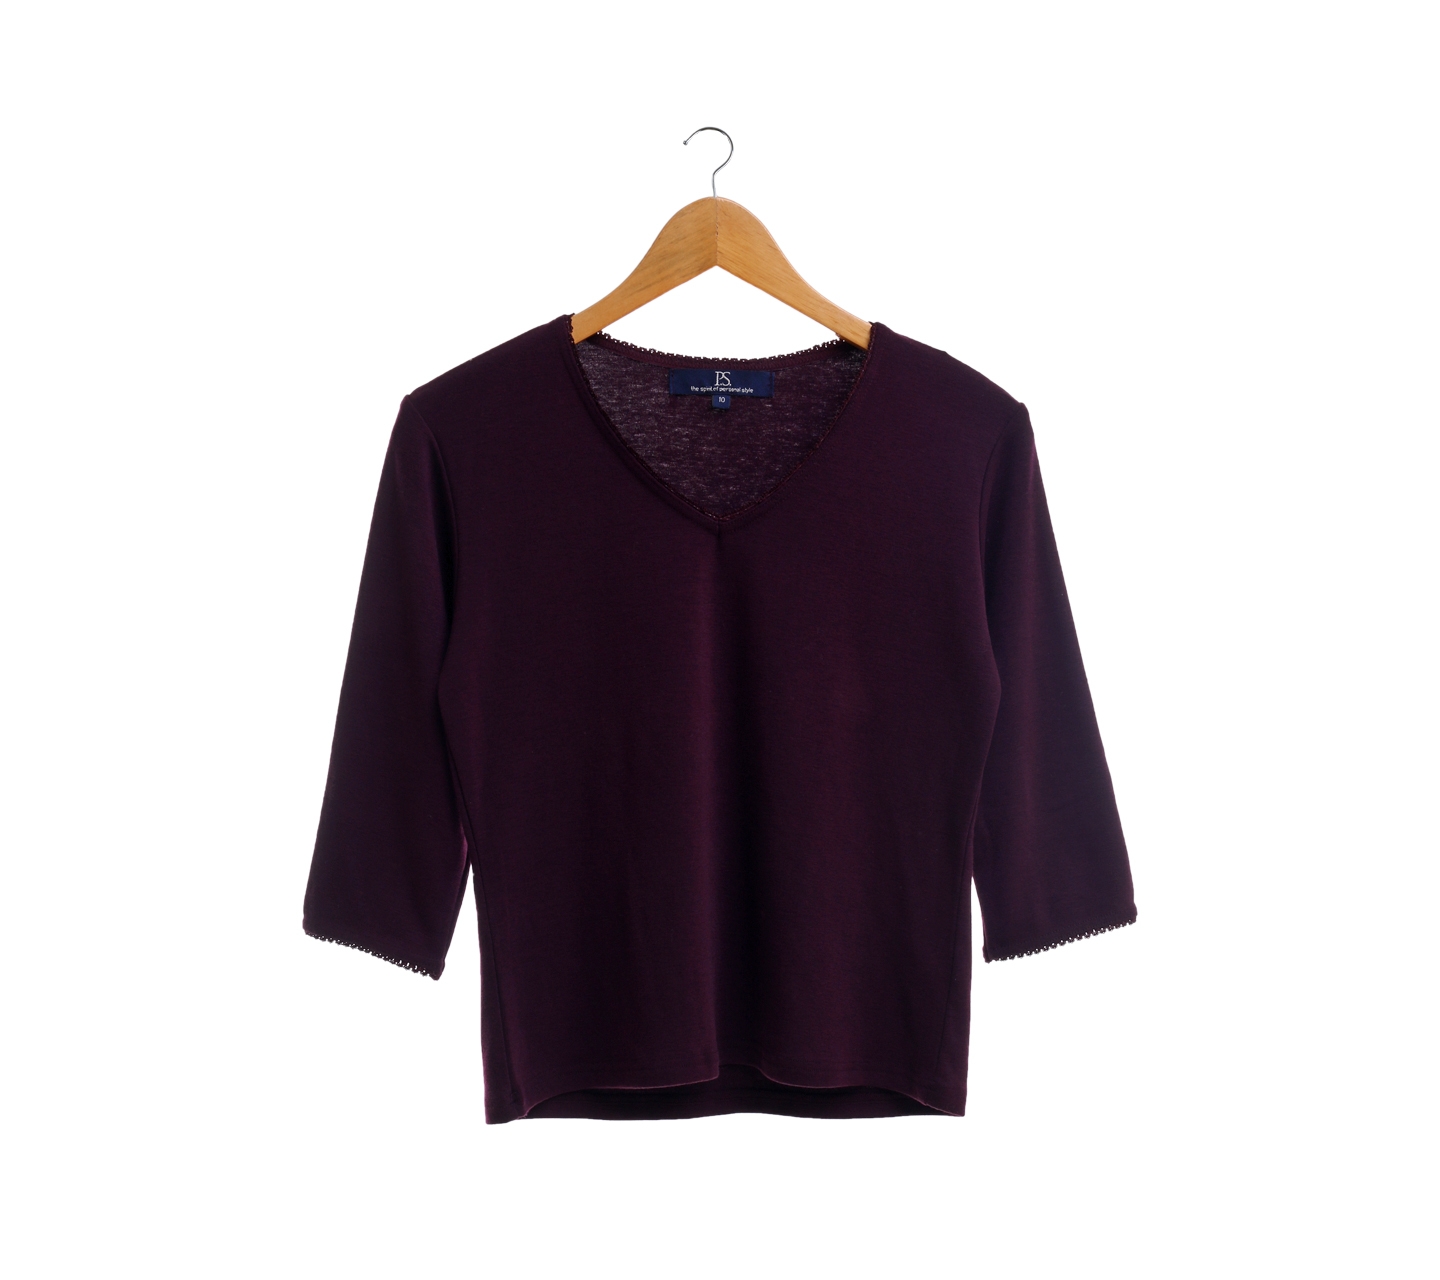 P.S. The Spirit Of Personal Style Dark Purple V-Neck Blouse